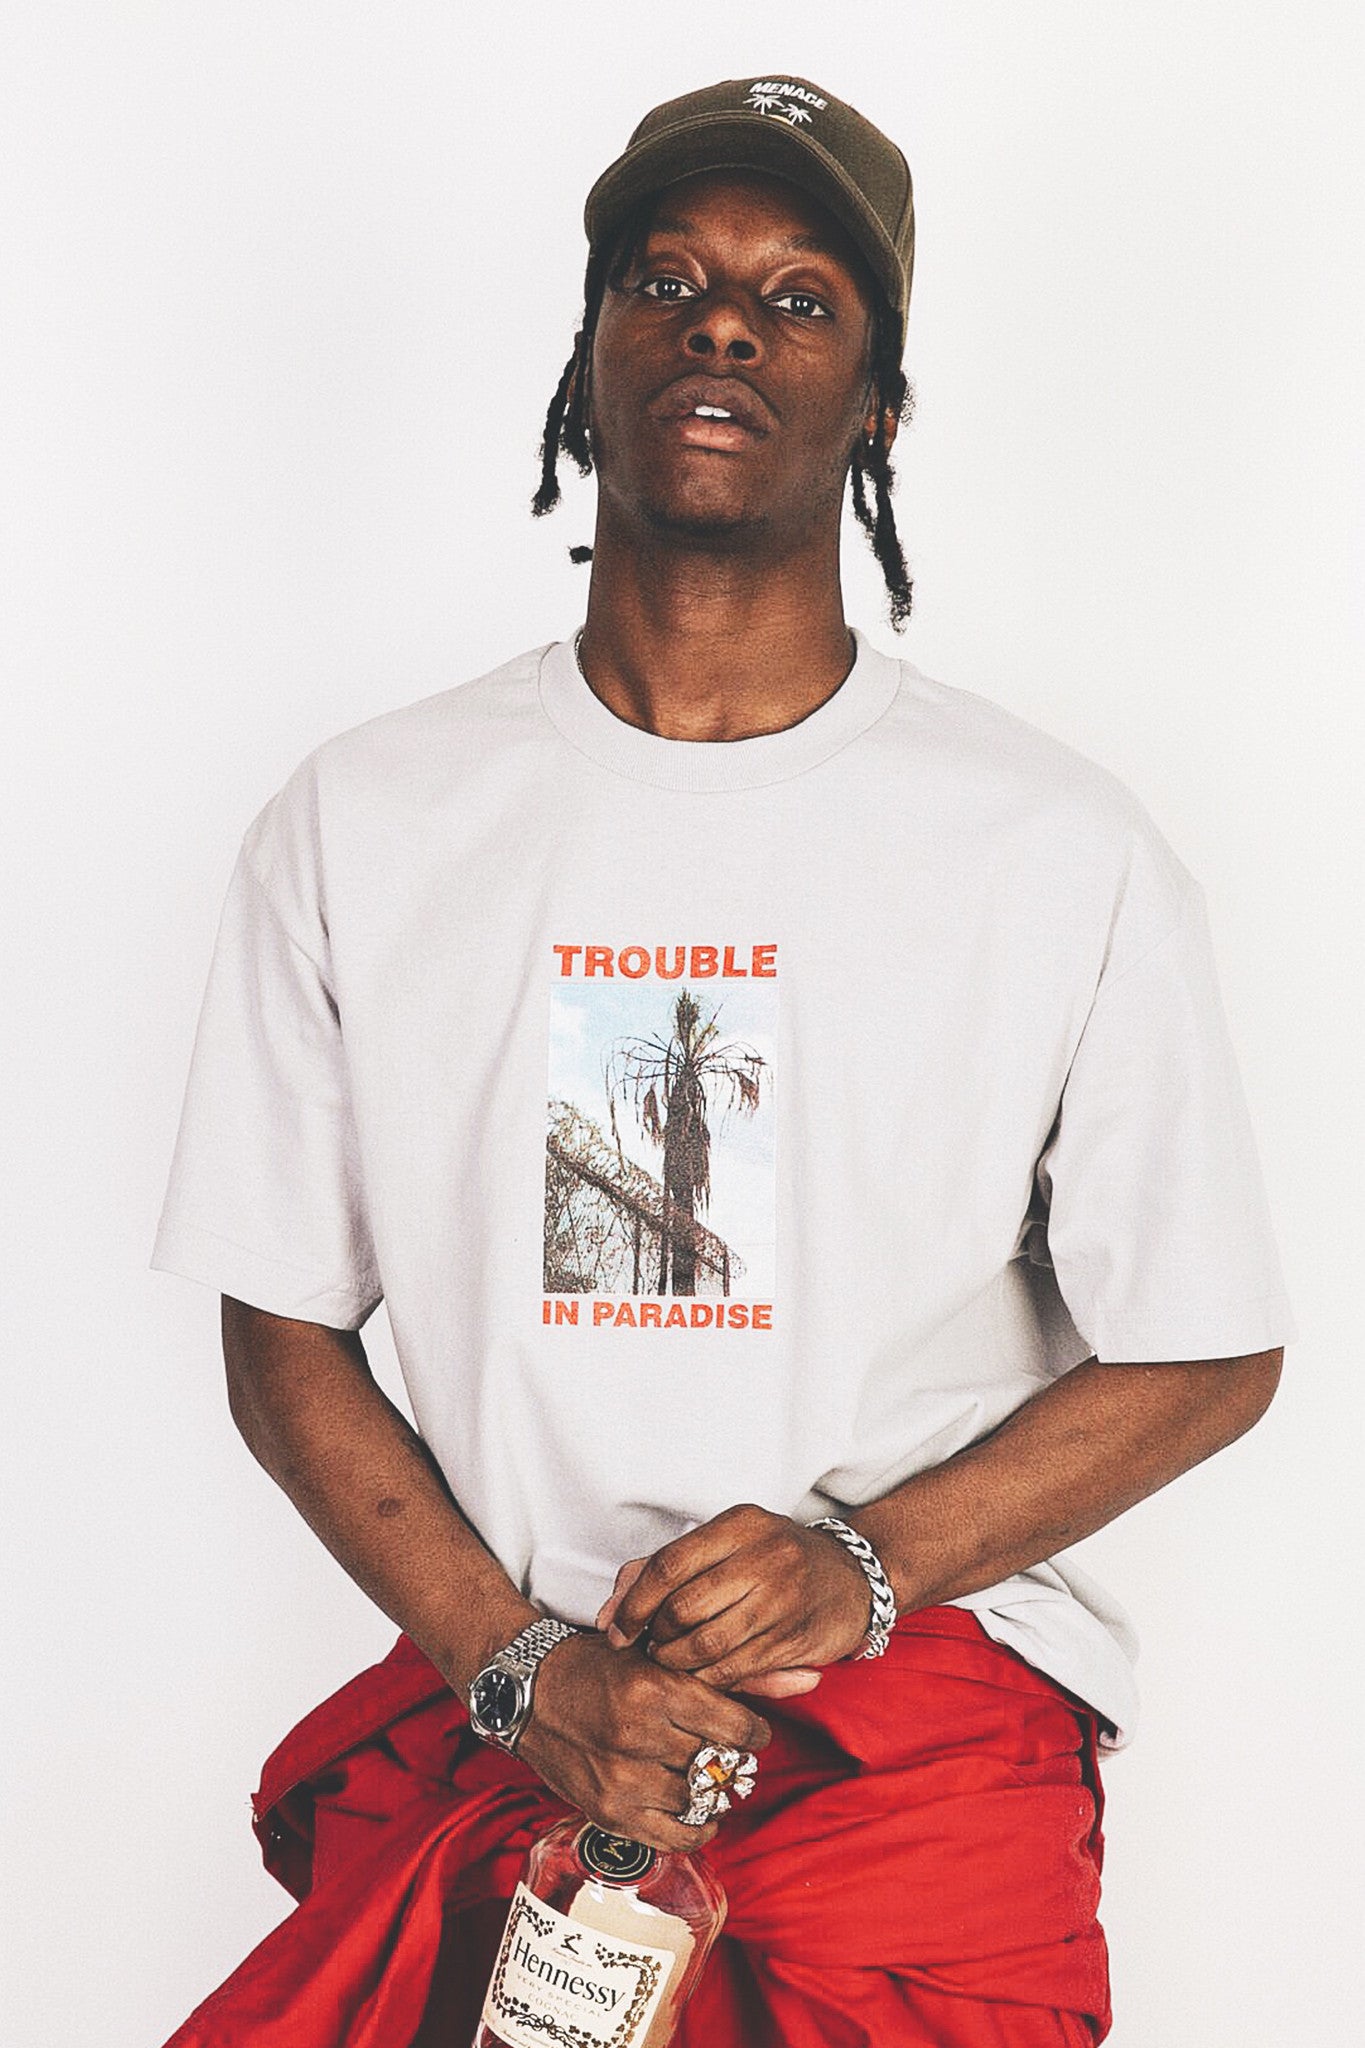 TROUBLE IN PARADISE T-SHIRT by MENACE